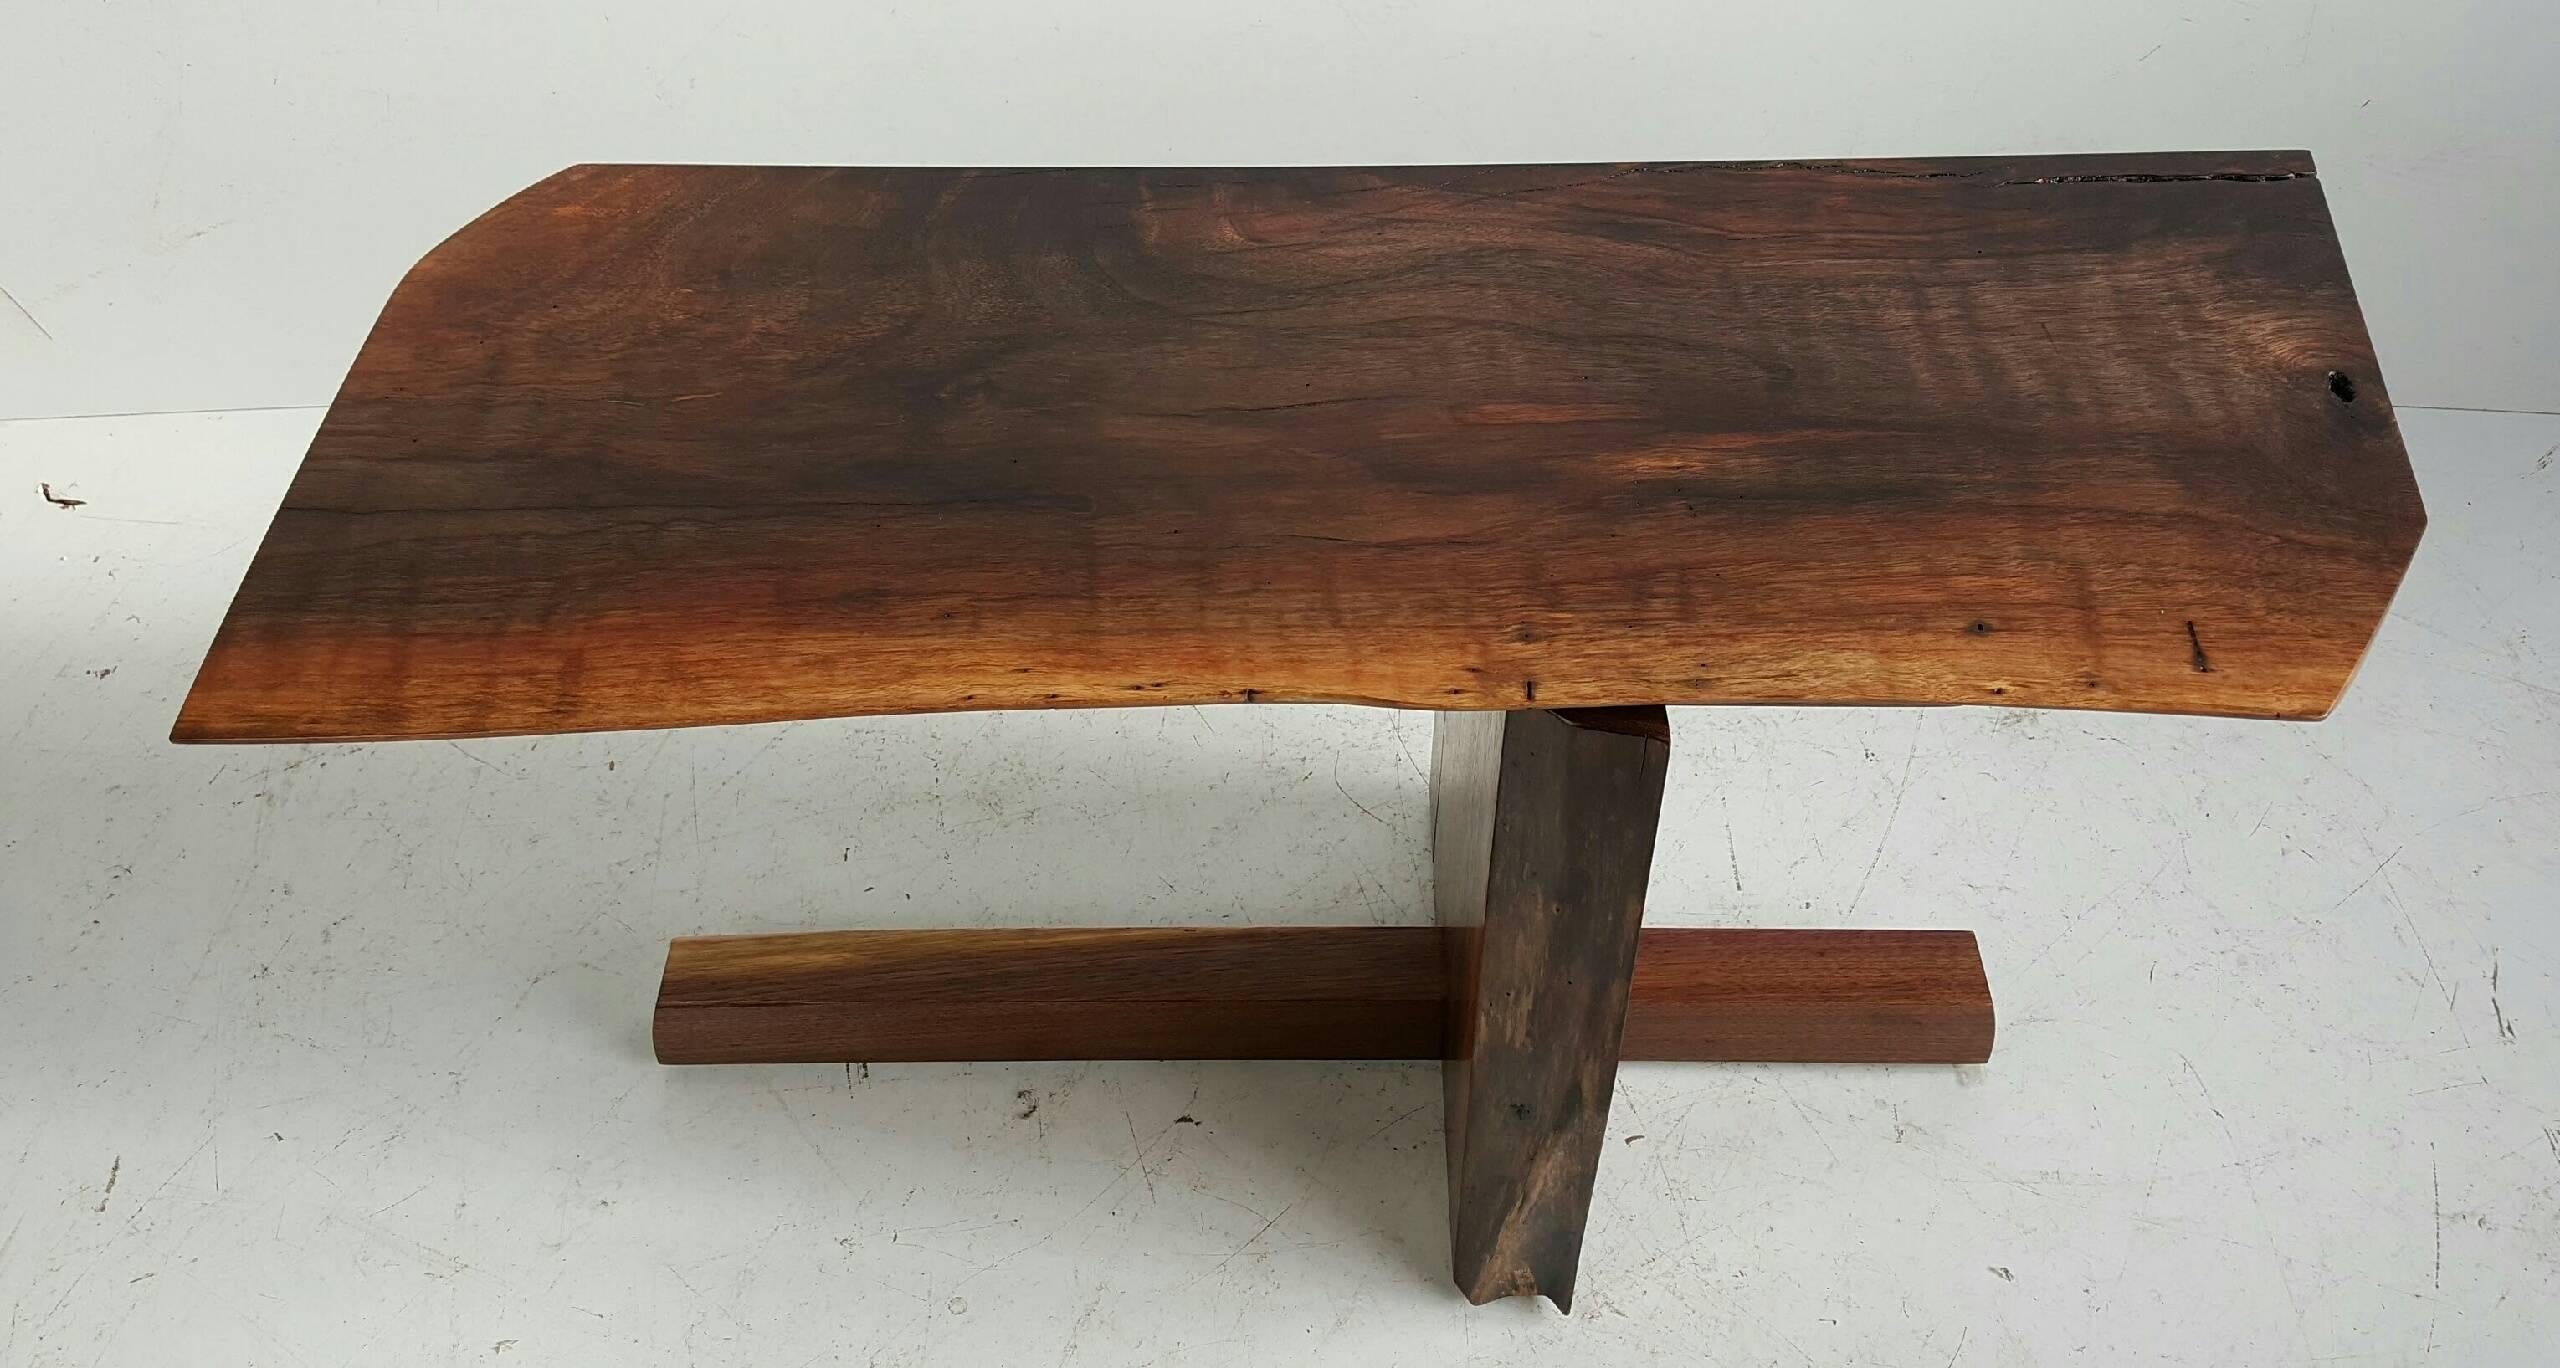 American Griff Logan Studio Workshop Free Edge Bench or Table in the Style of Nakashima